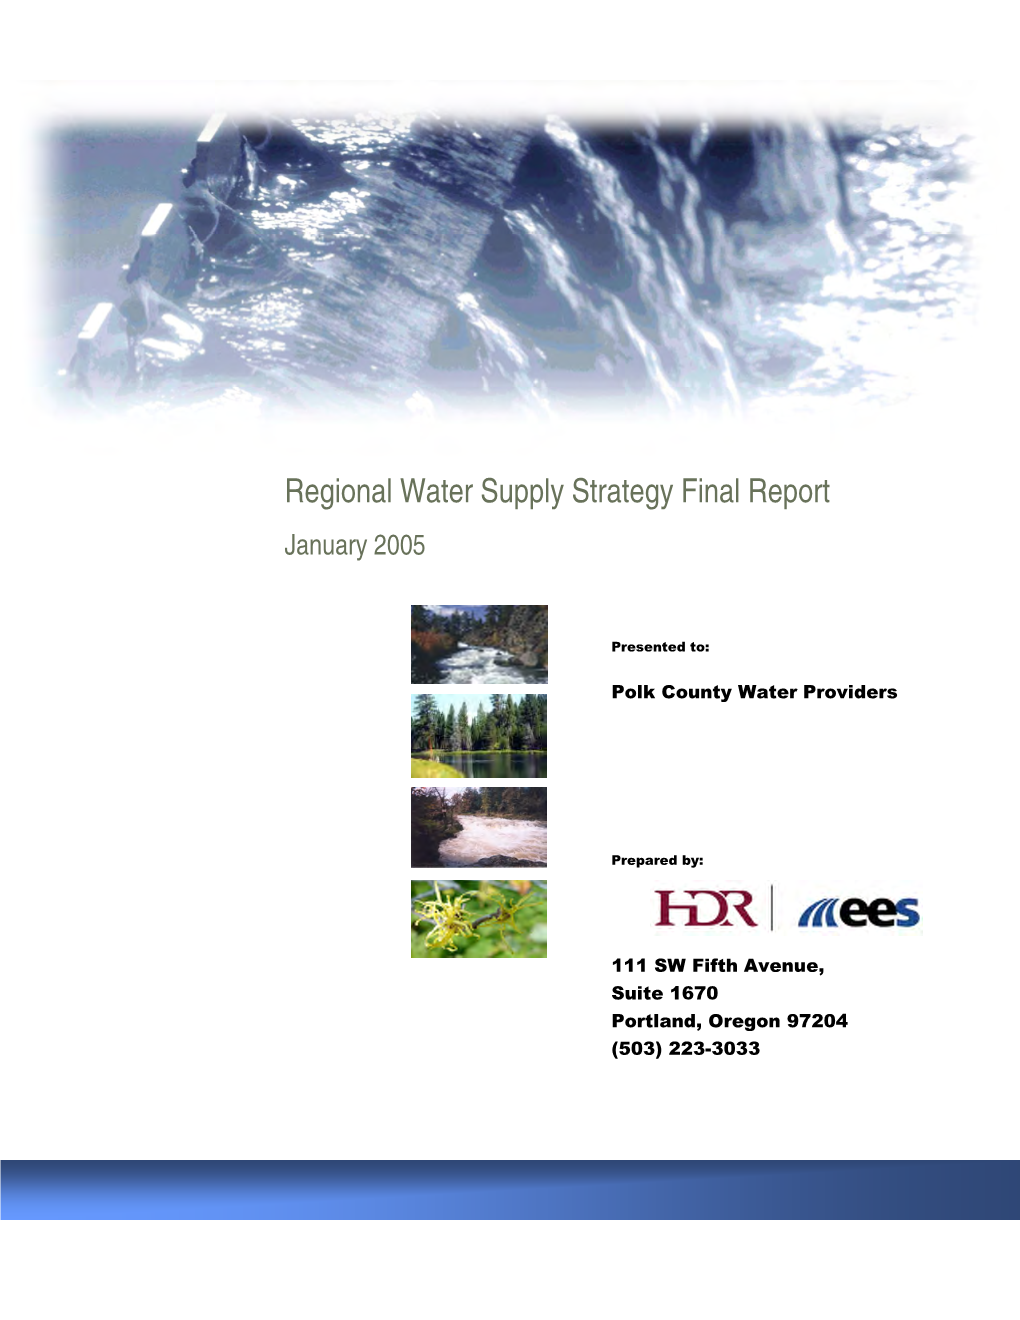 Regional Water Supply Strategy Final Report January 2005